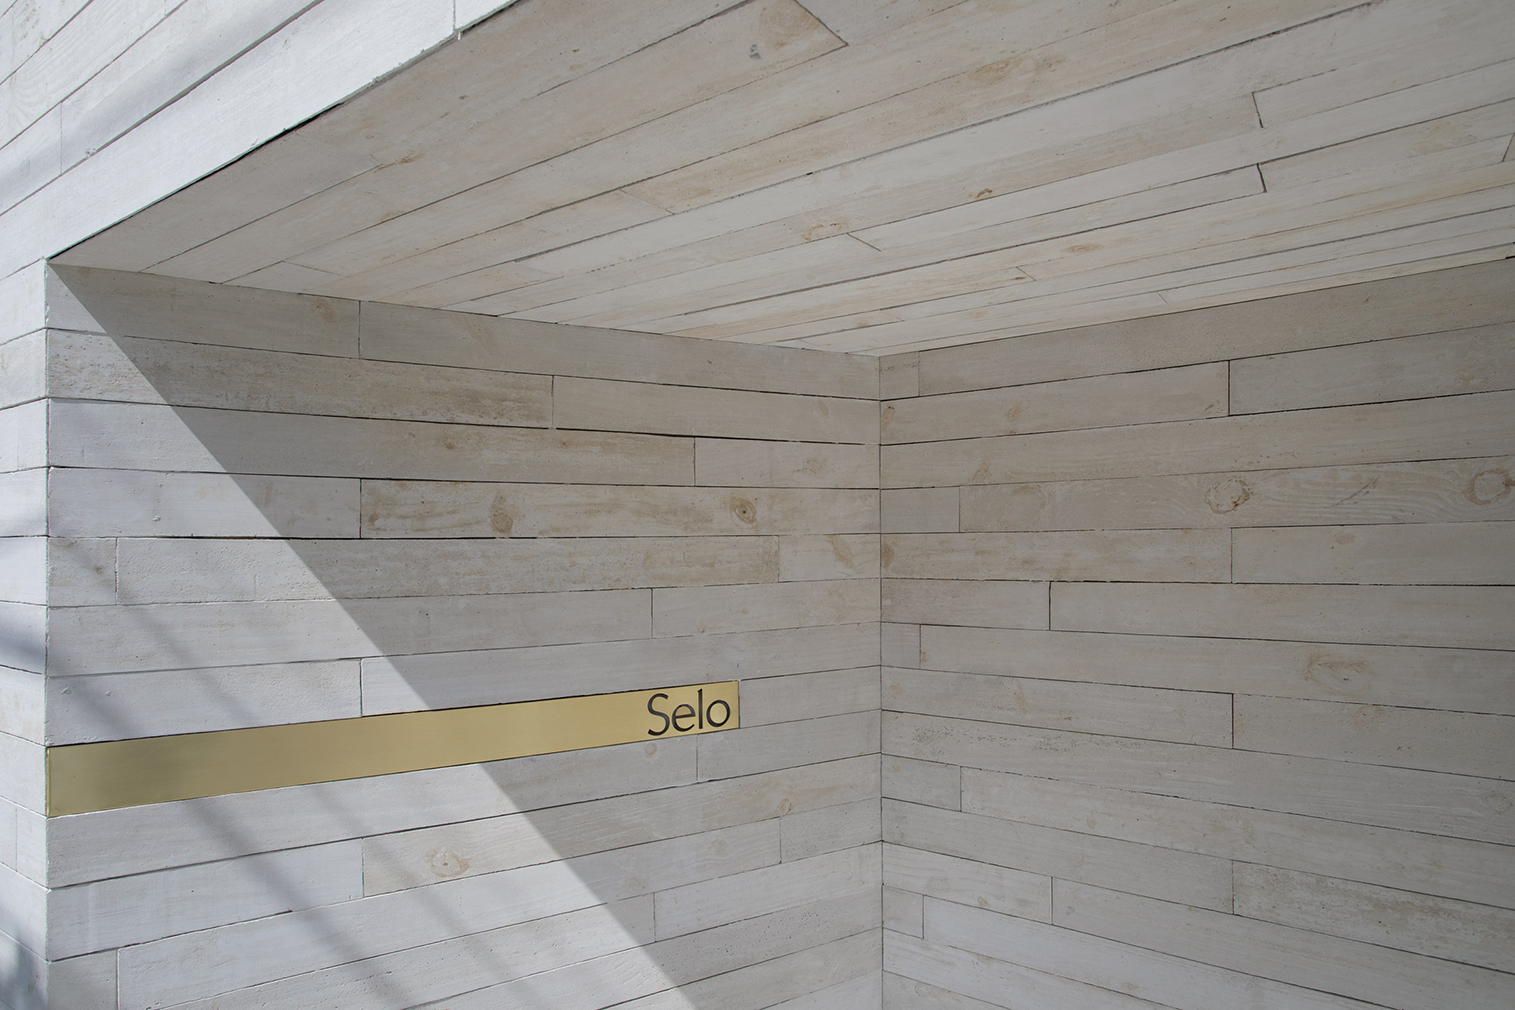 Selo Store in Sao Paulo takes minimalism to the max